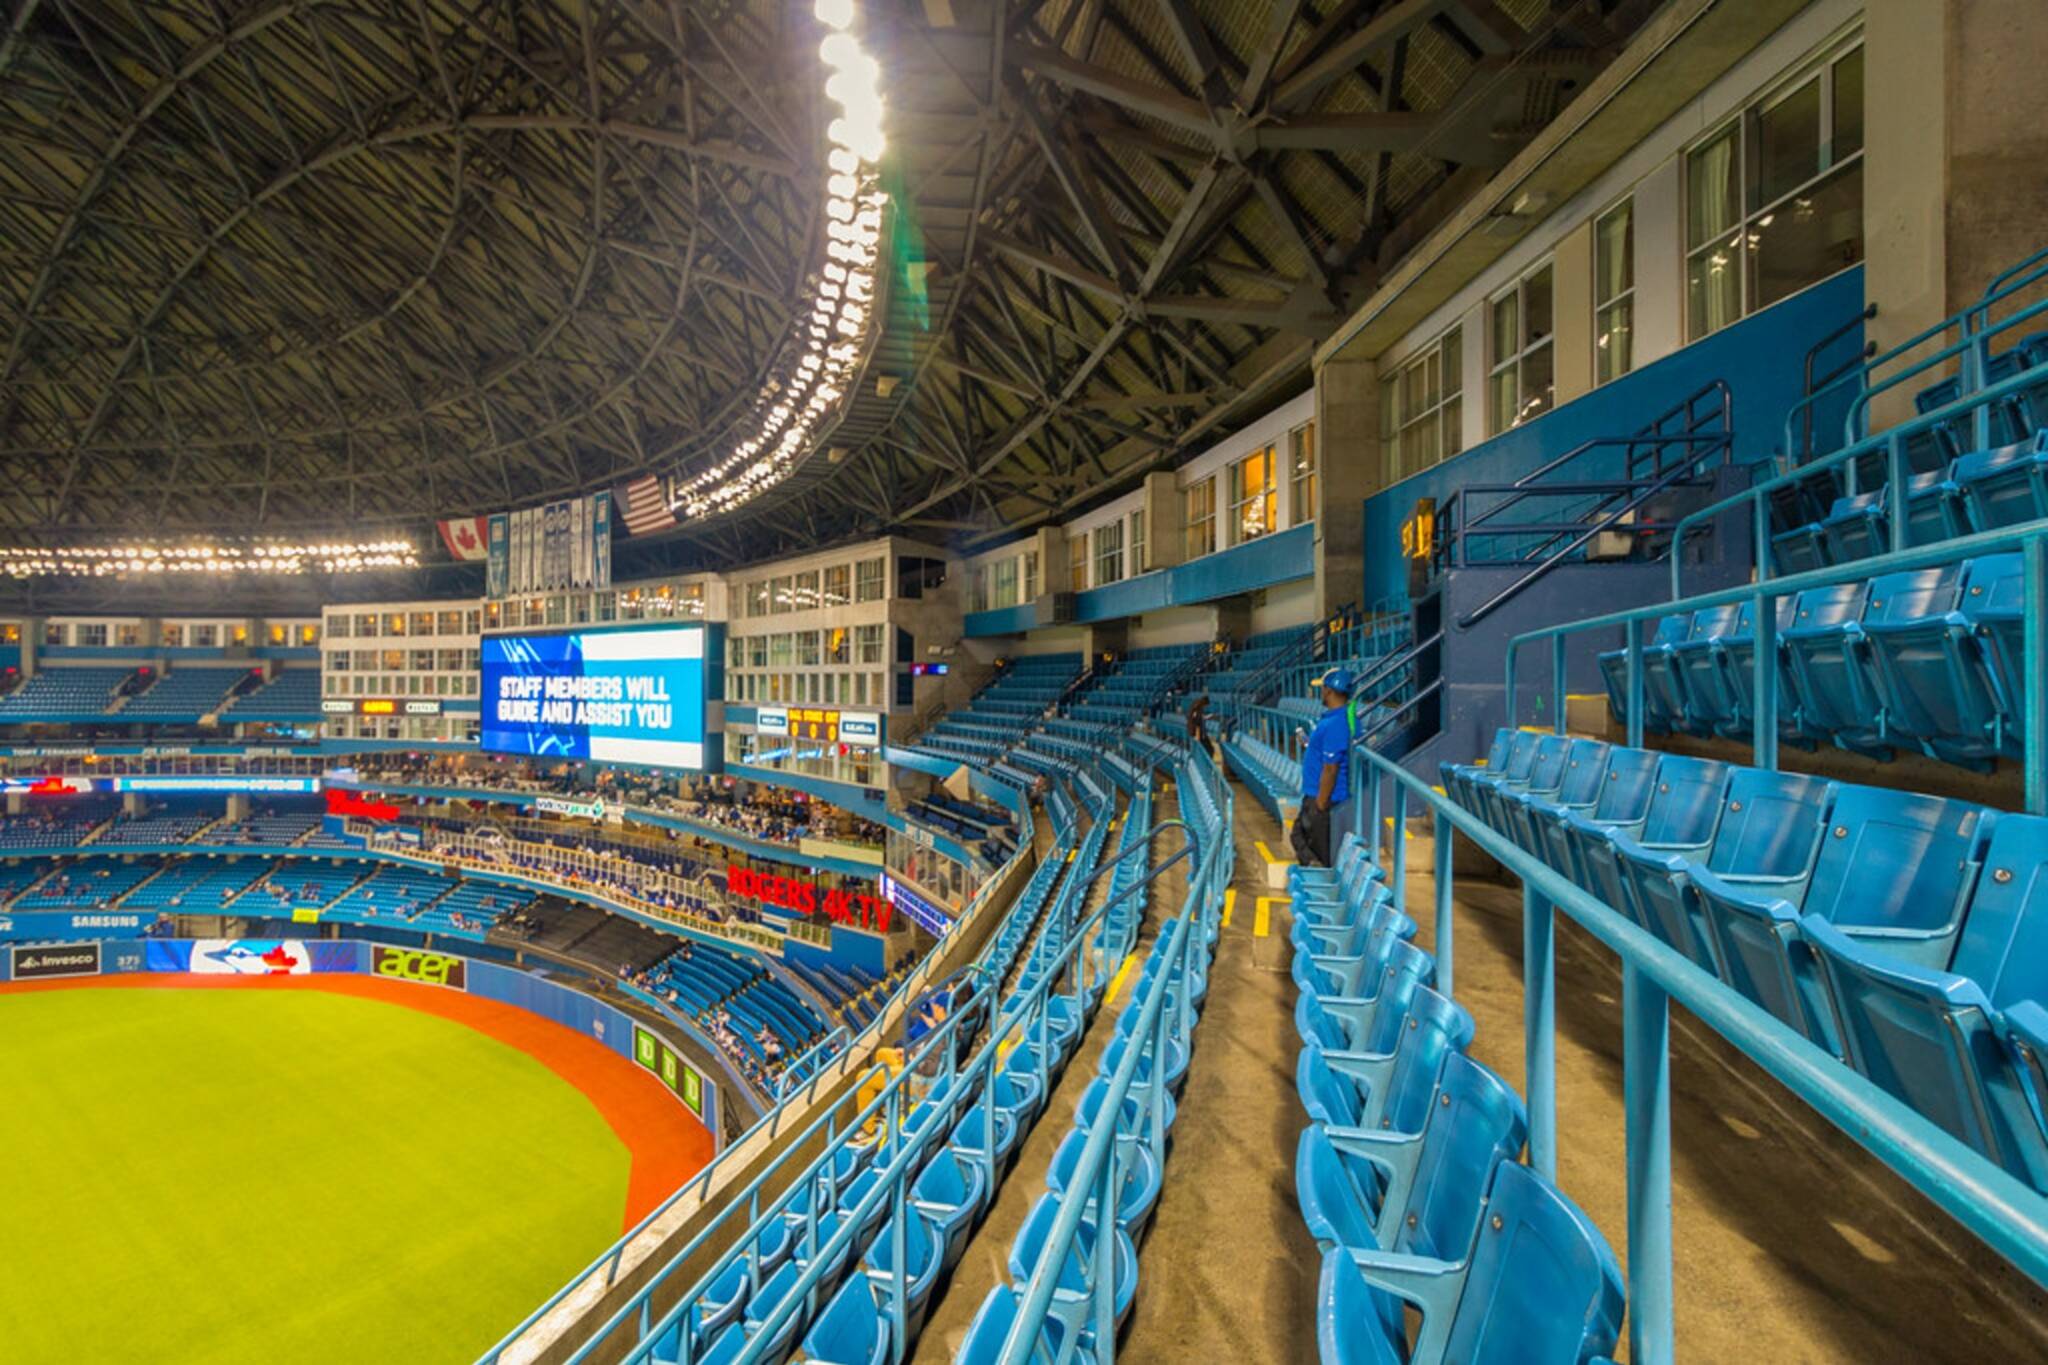 Report: Blue Jays returning to Toronto, will stay at hotel attached to  stadium